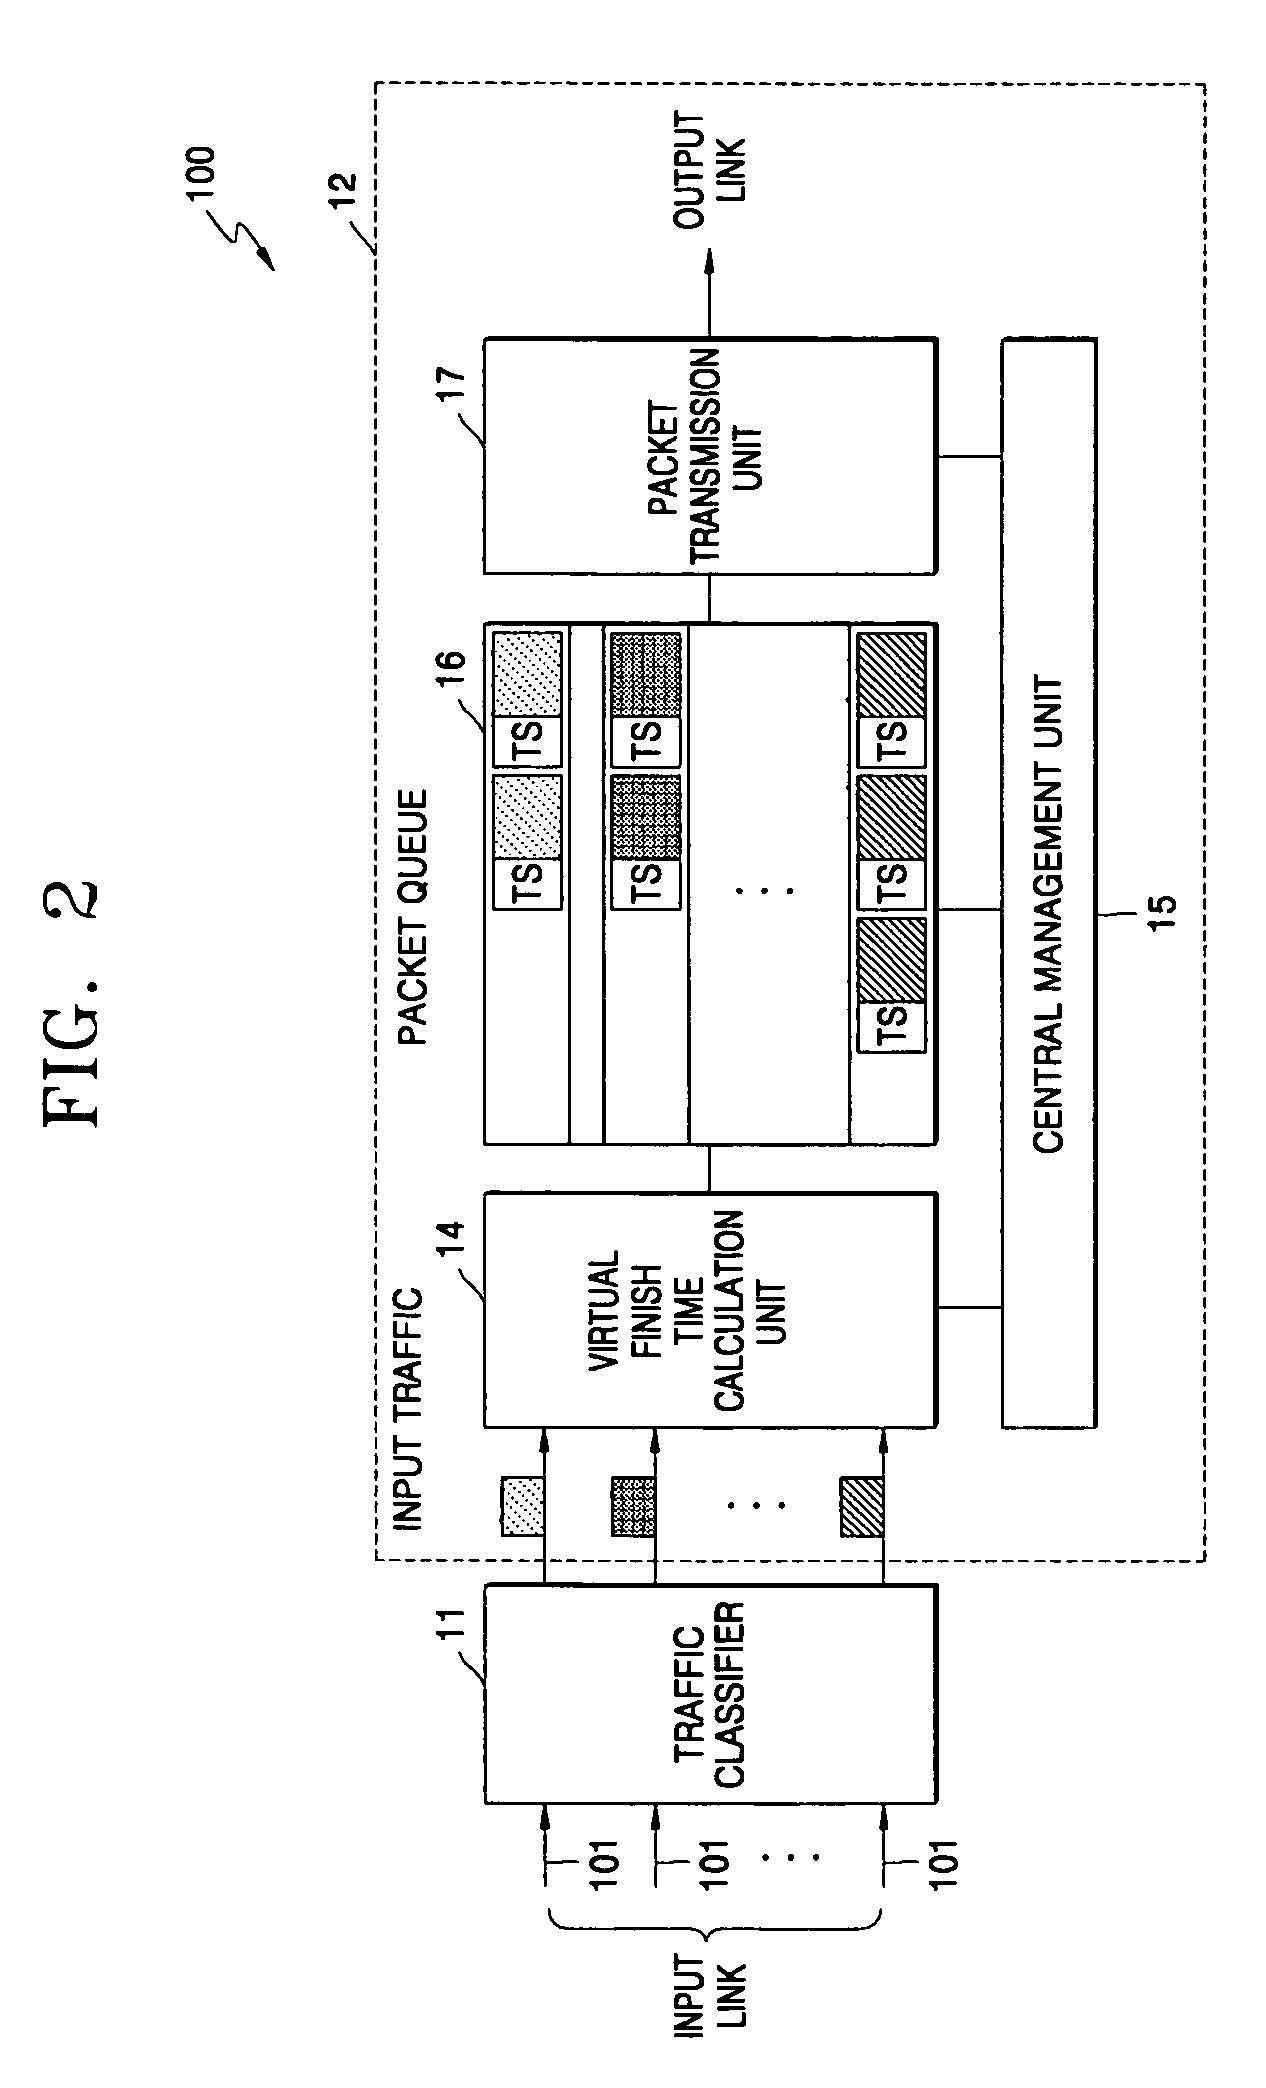 Packet scheduling system and method for high-speed packet networks